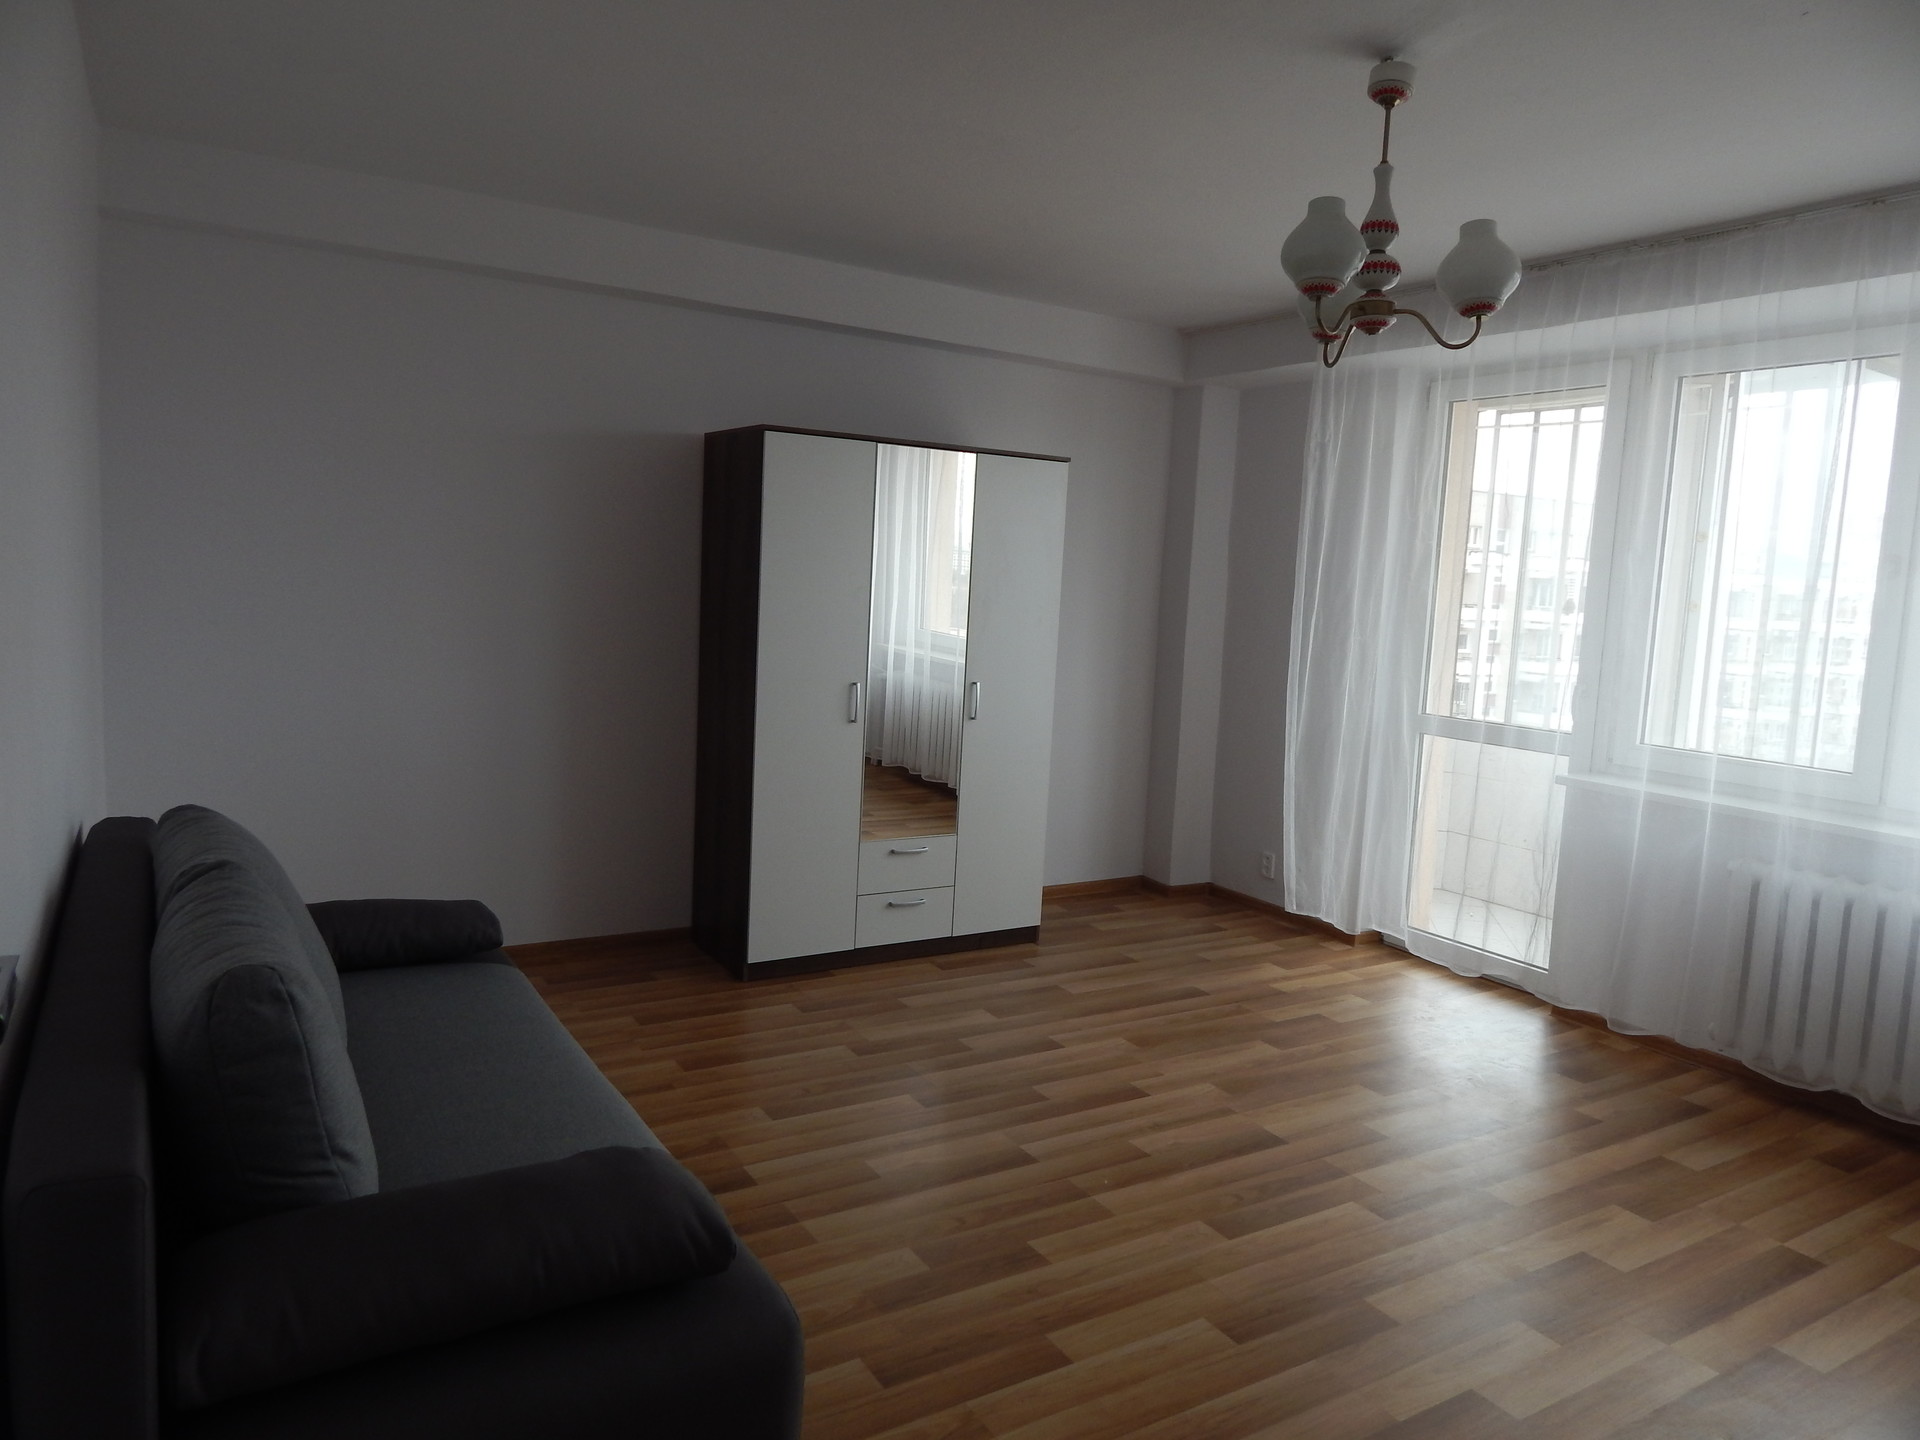 Room For Rent In 3 Bedroom Apartment In Warsaw With Elevator